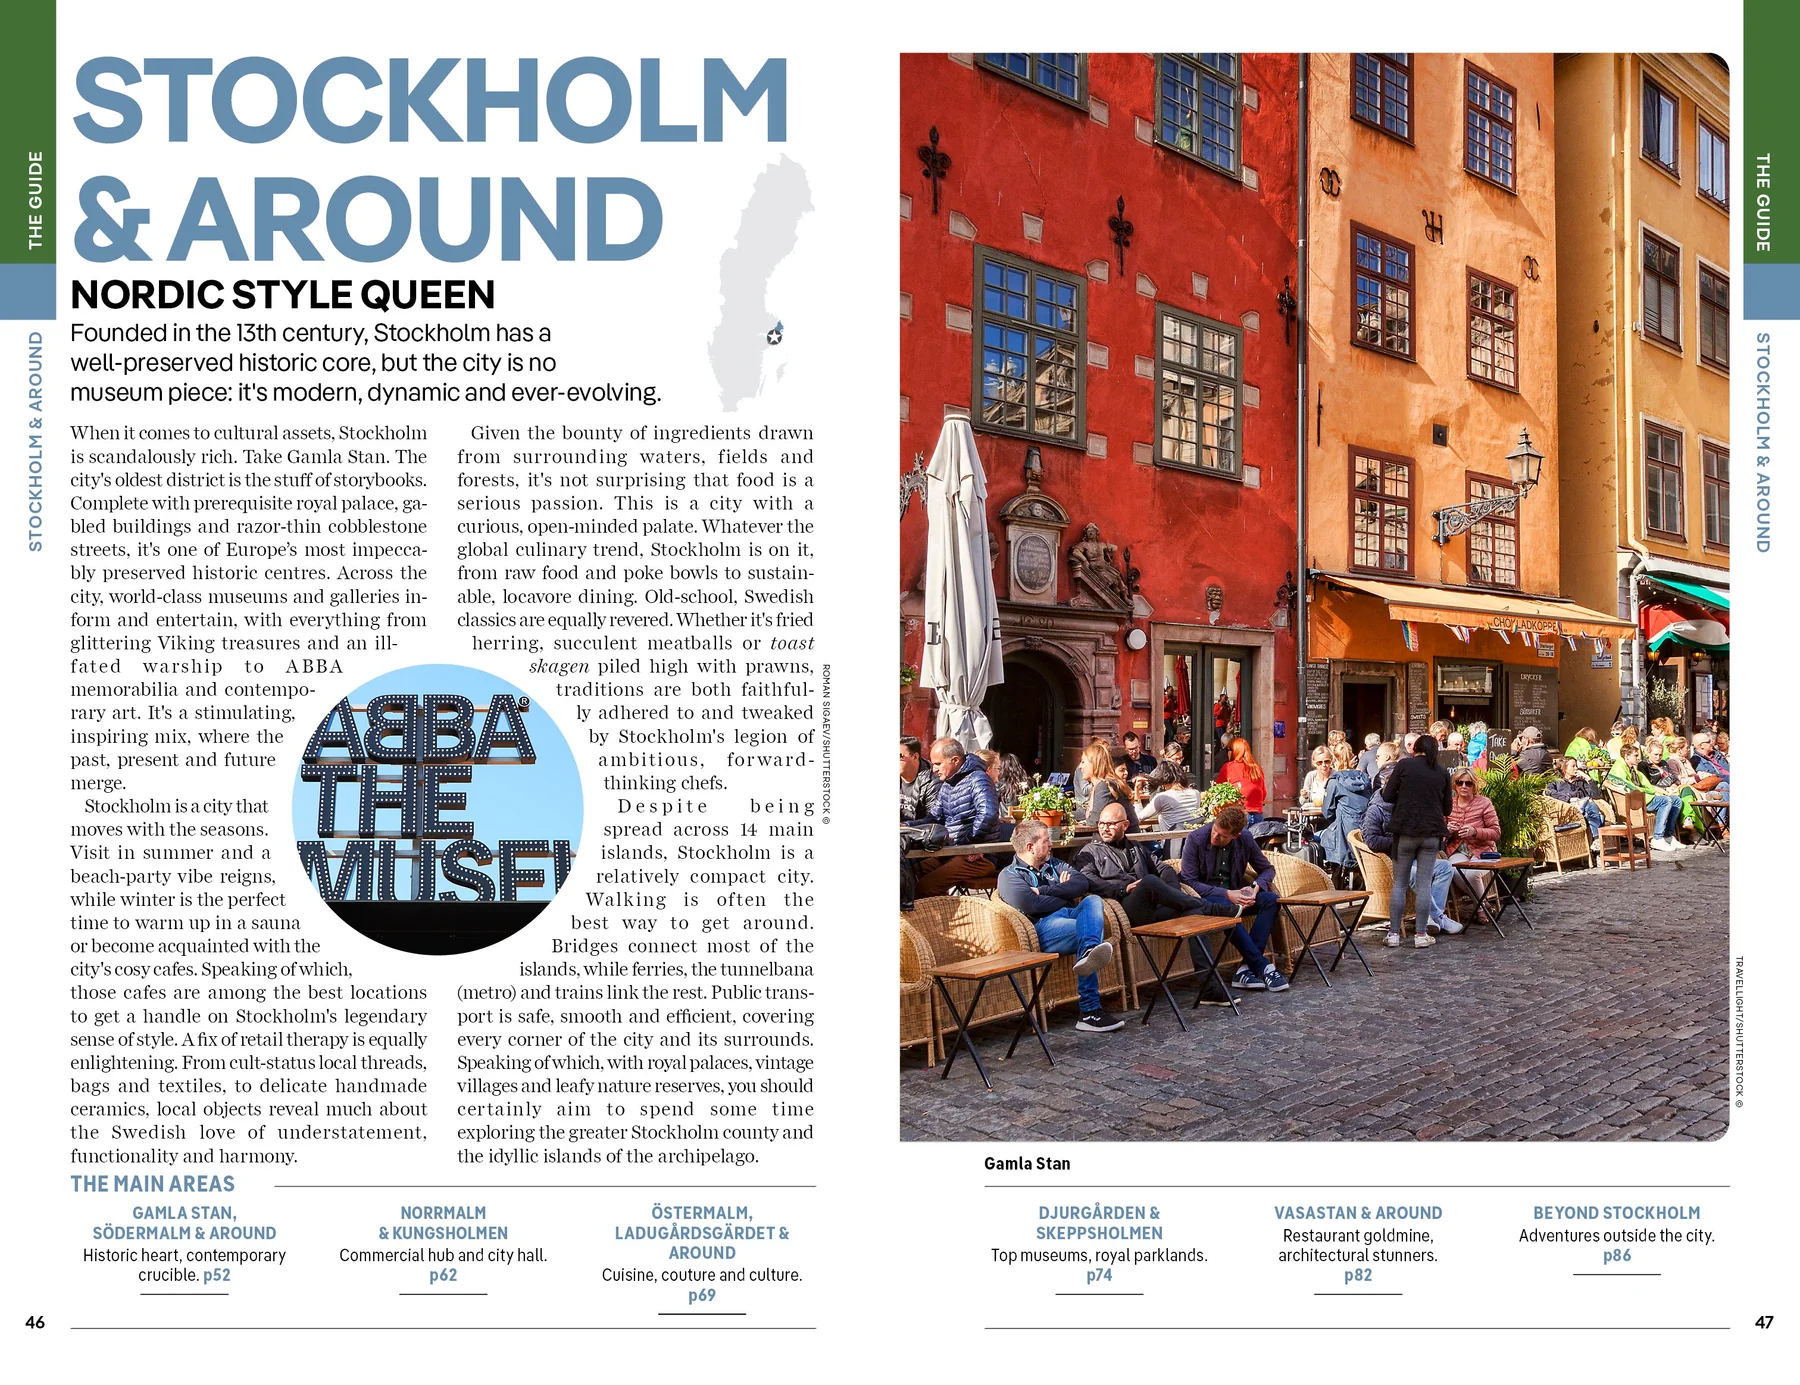 Sweden Lonely Planet